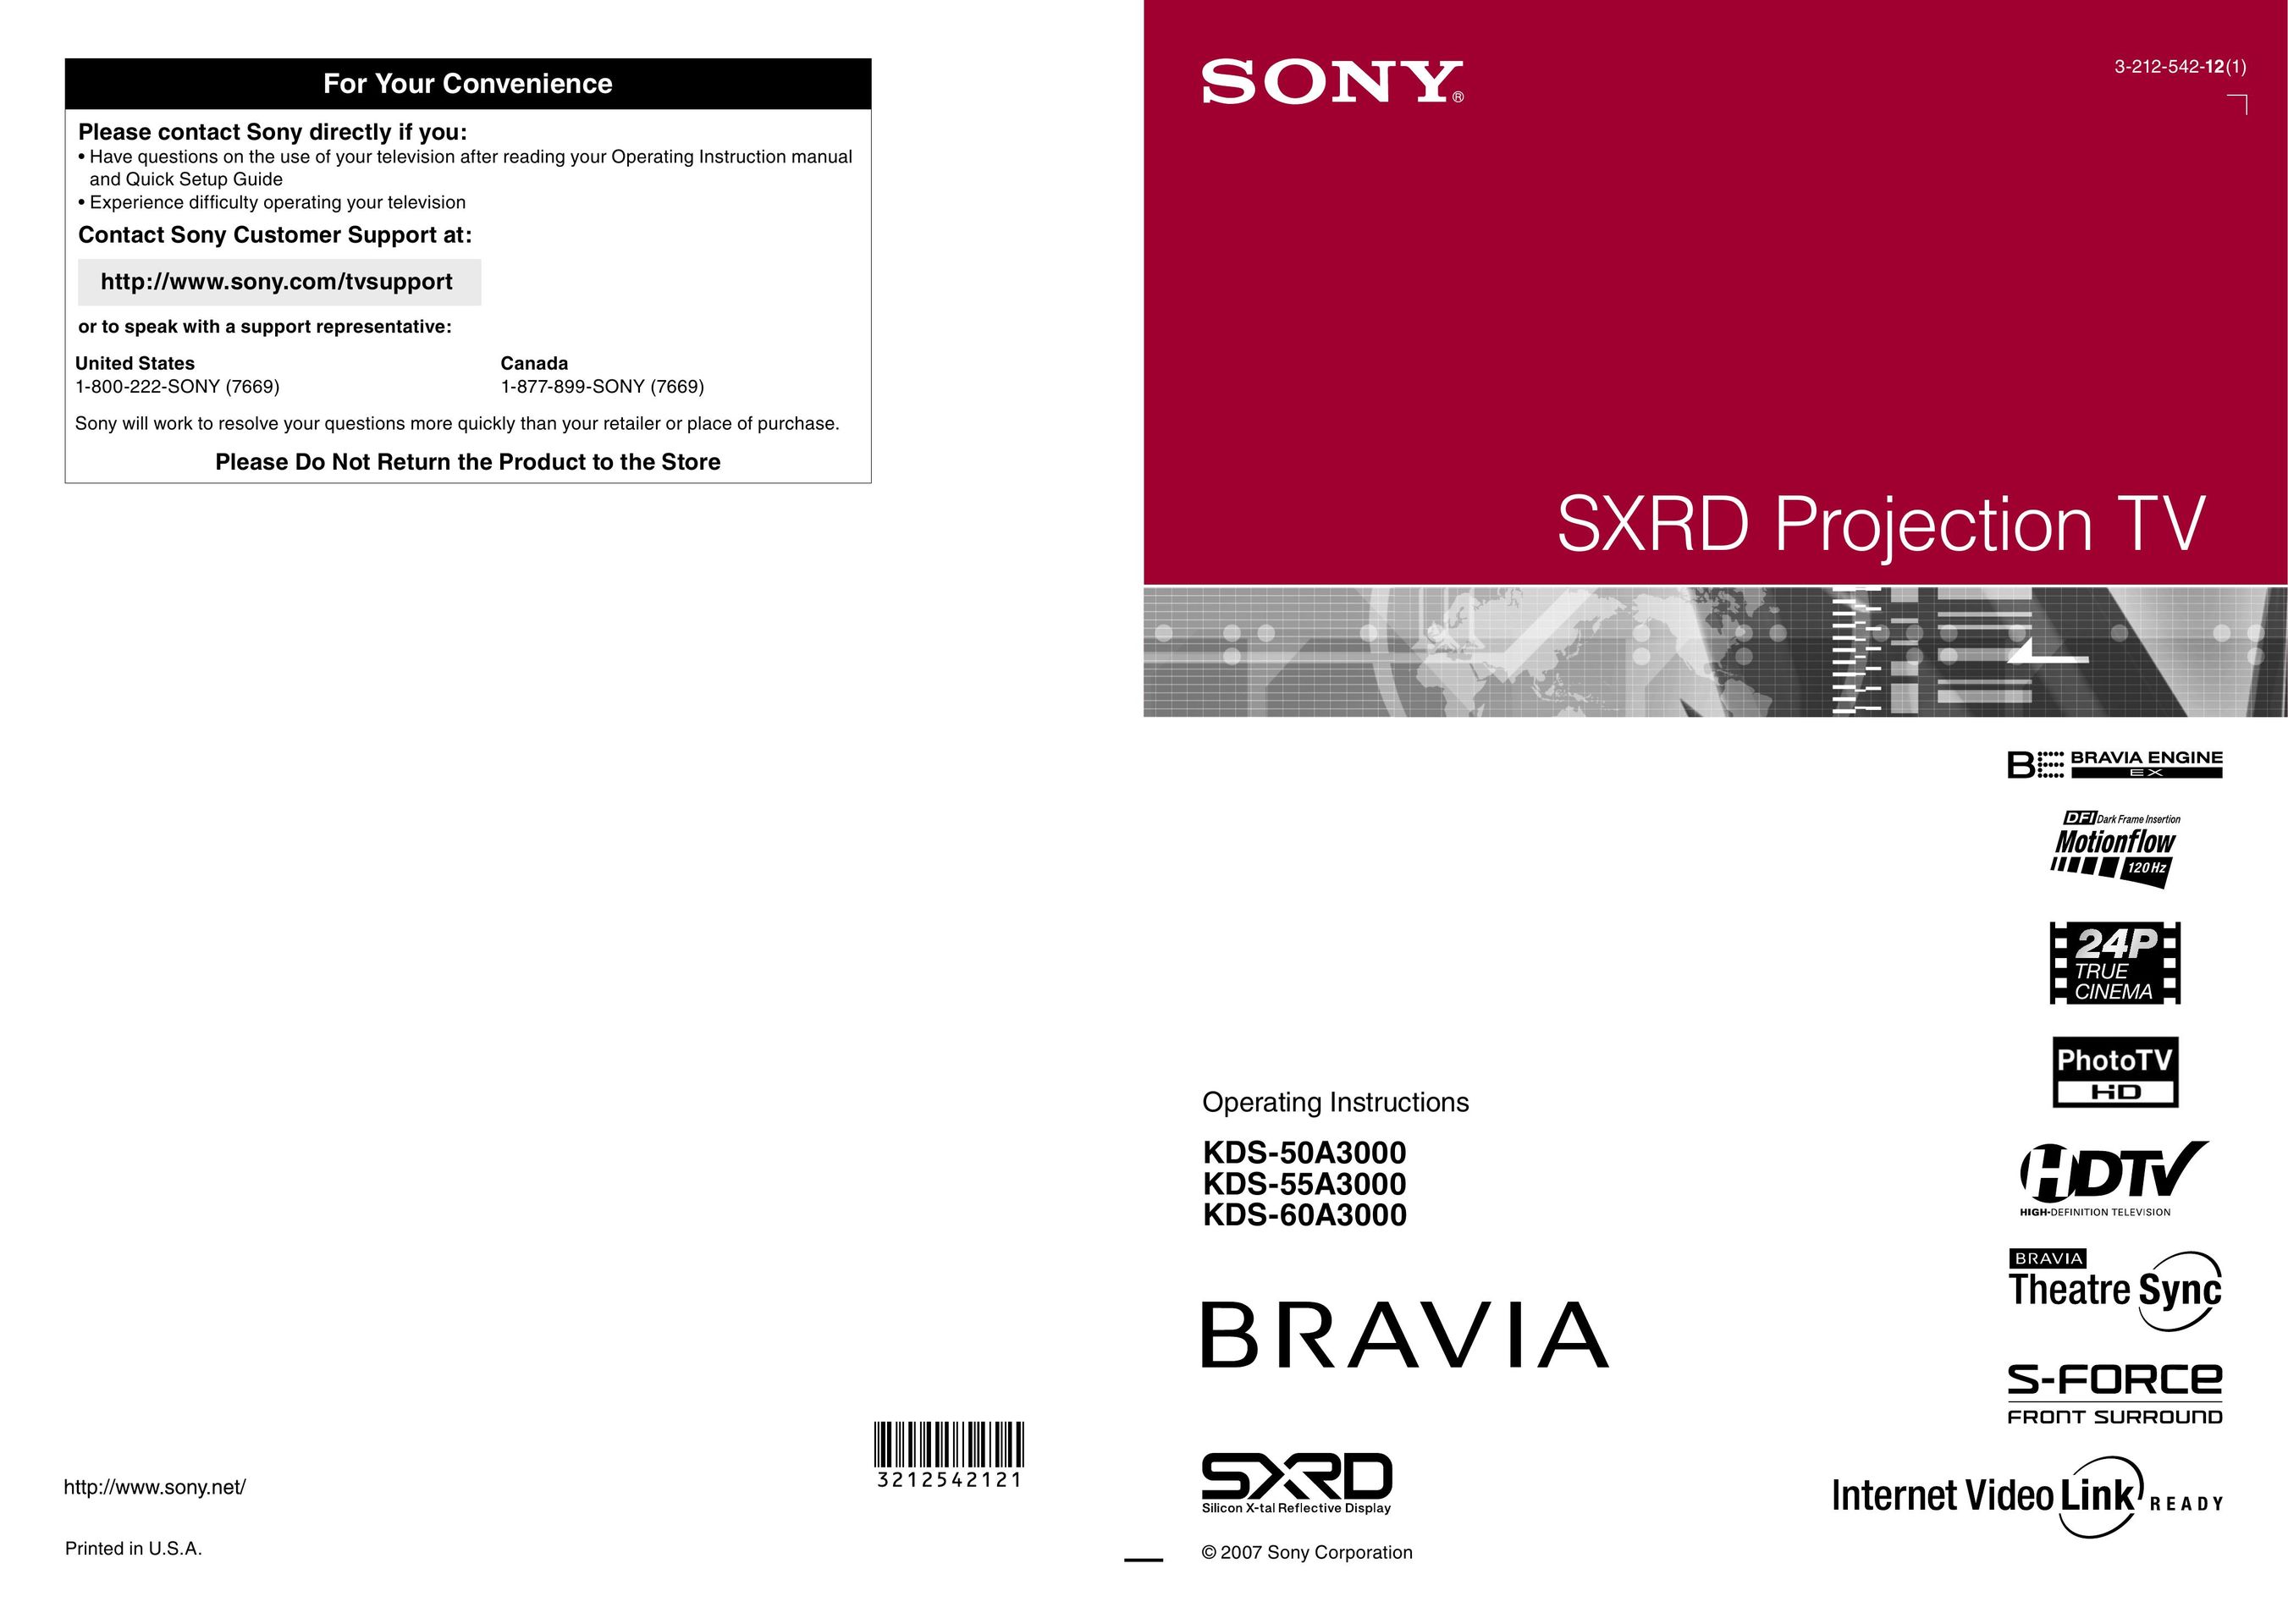 Sony KDS-50A3000, KDS-55A3000, KDS-60A3000 Projection Television User Manual